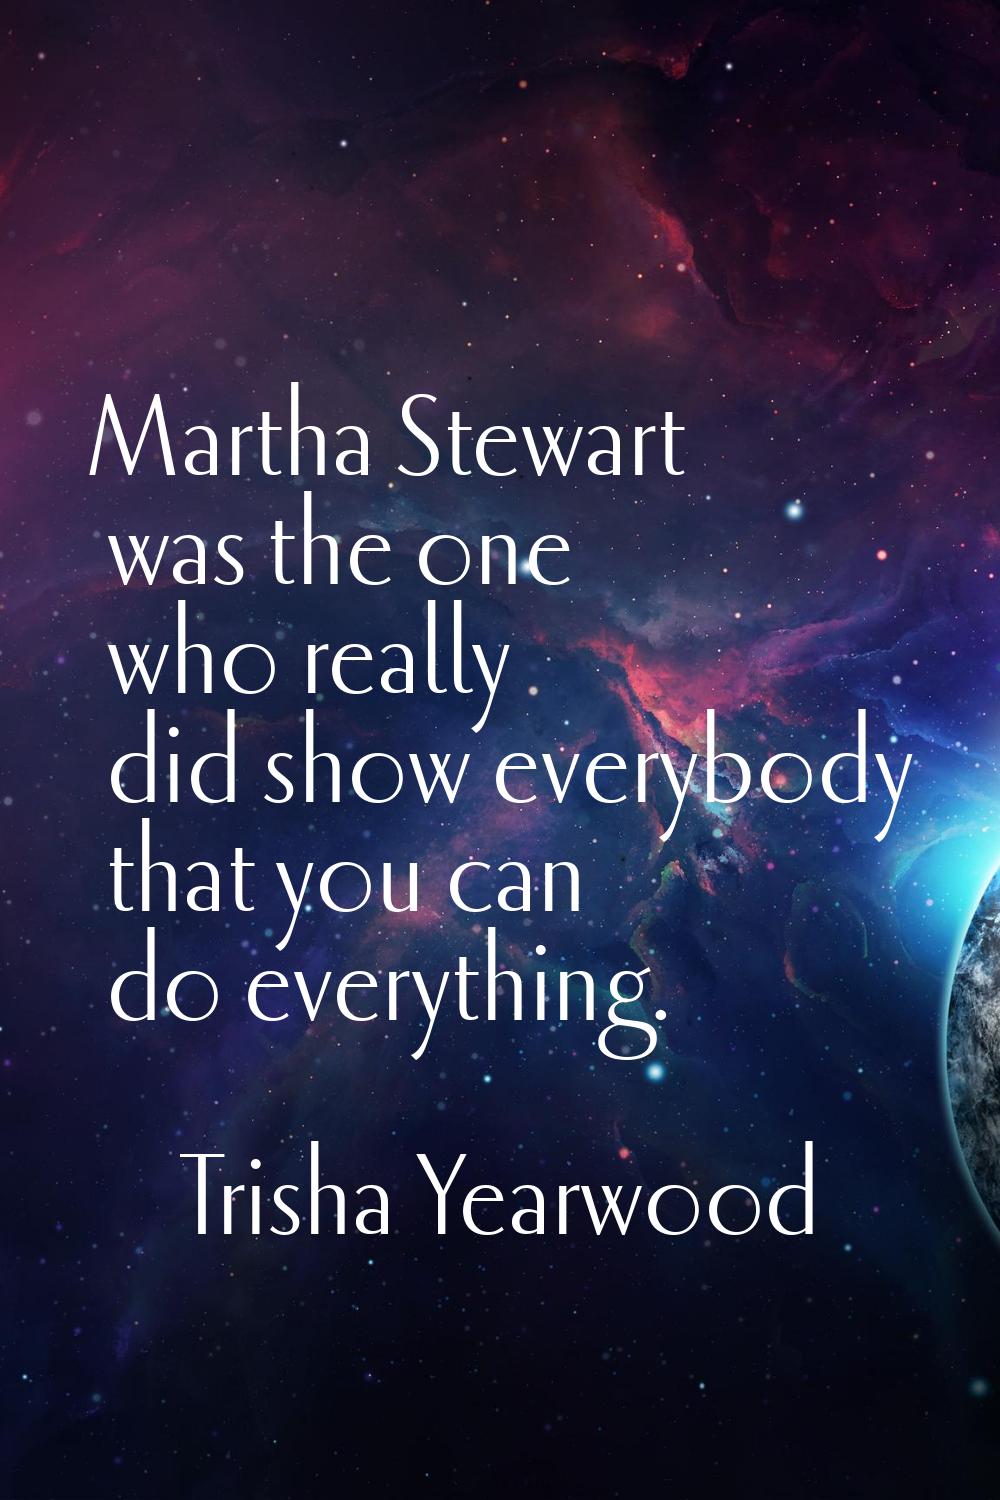 Martha Stewart was the one who really did show everybody that you can do everything.